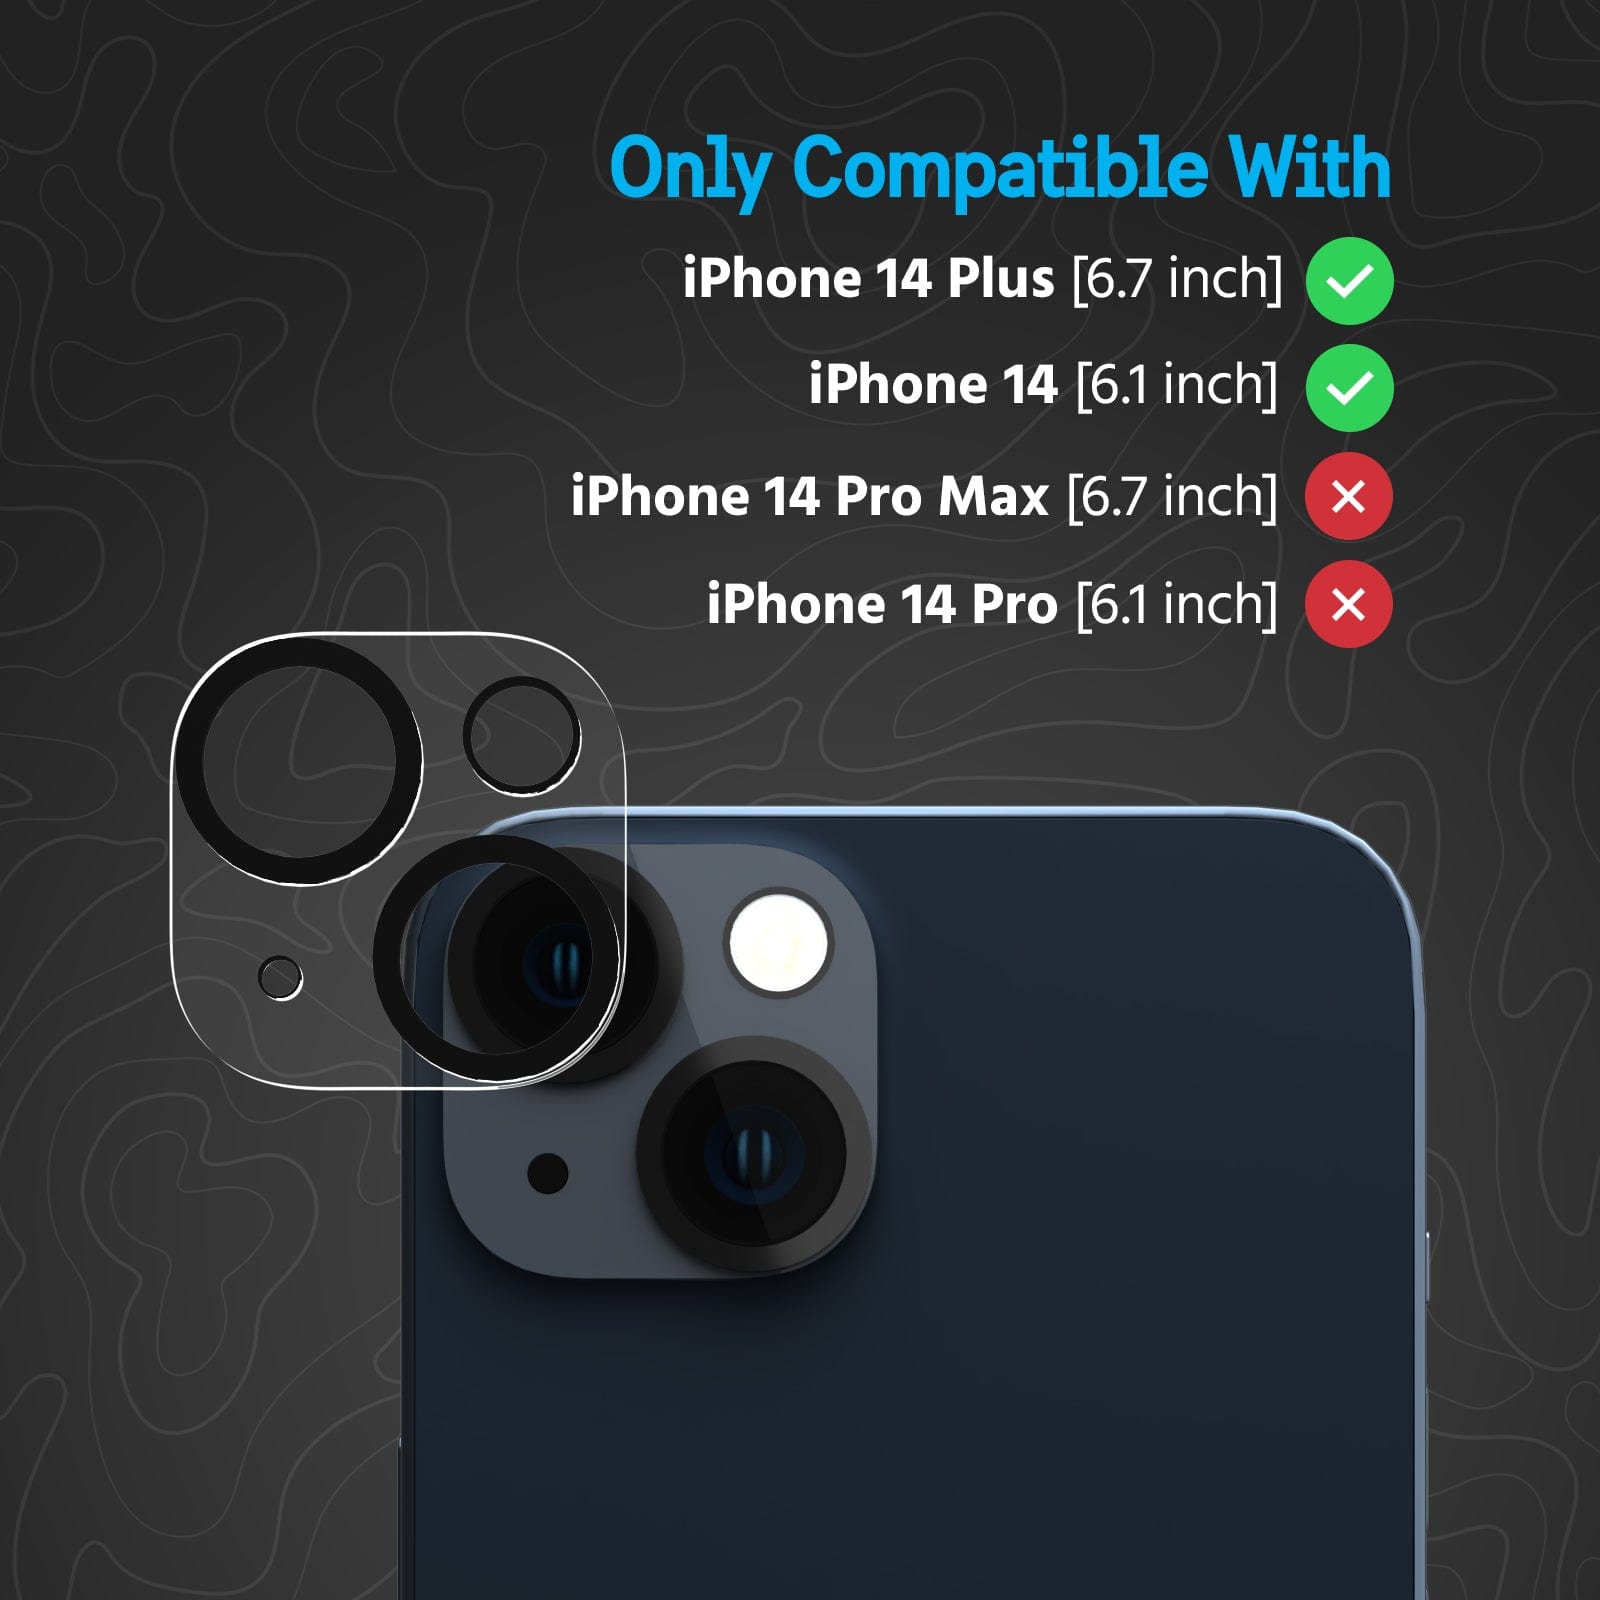 Only compatible with iPhone 14 Plus and iPhone 14. 